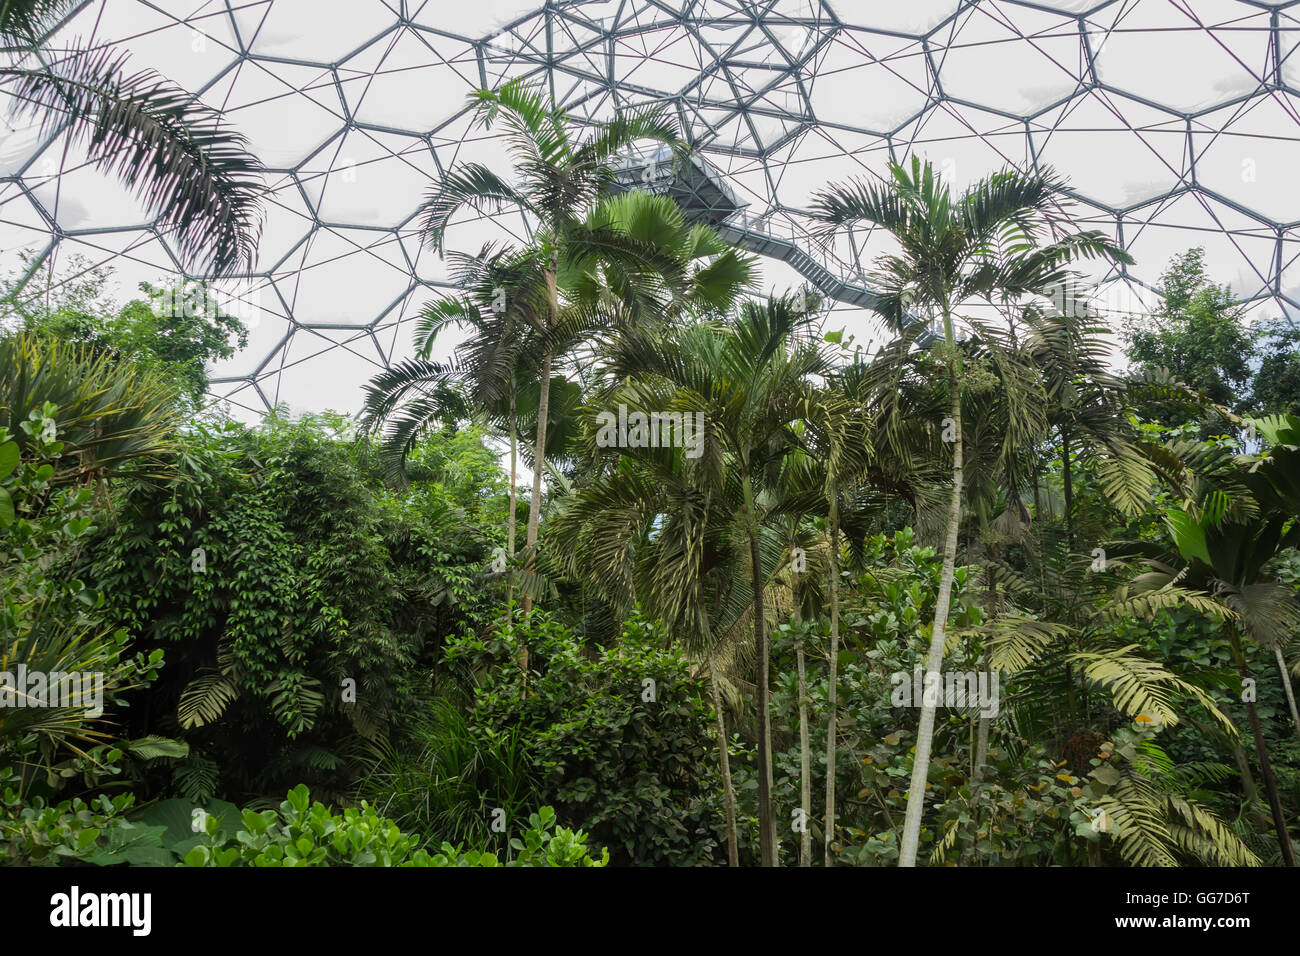 The rainforest biome of the Eden project in cornwall england Stock Photo